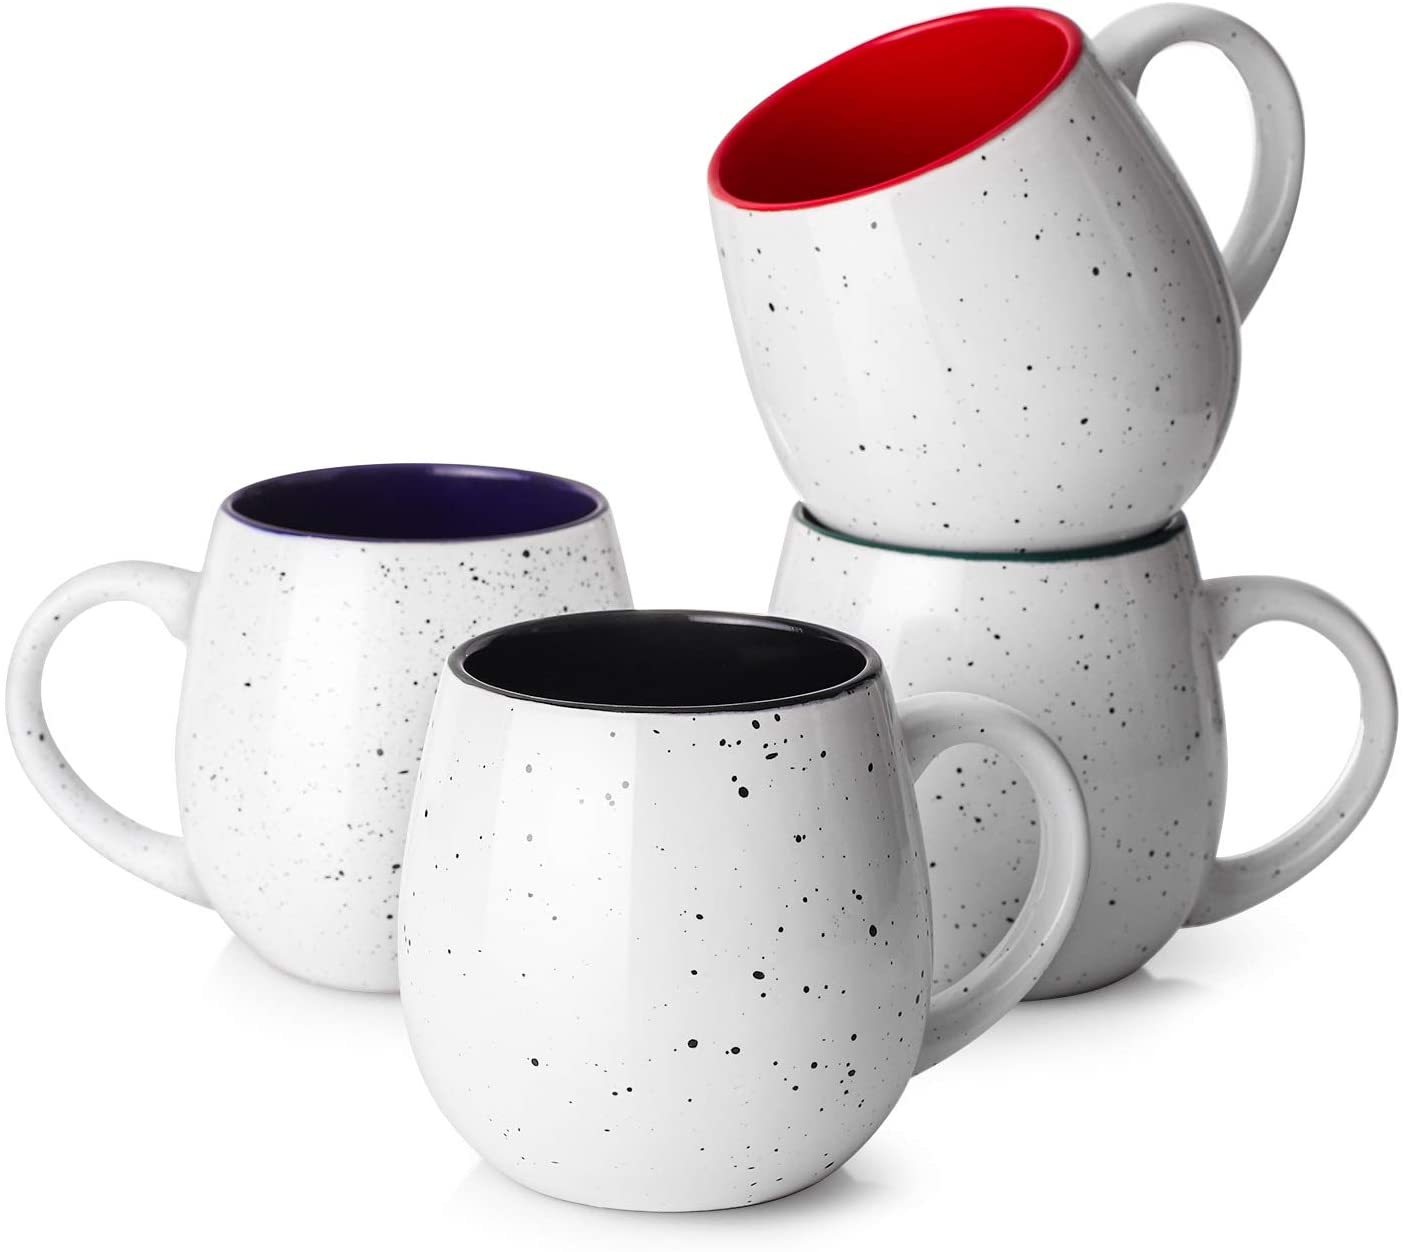 14-best-large-coffee-mugs-for-every-collection-relaxing-decor